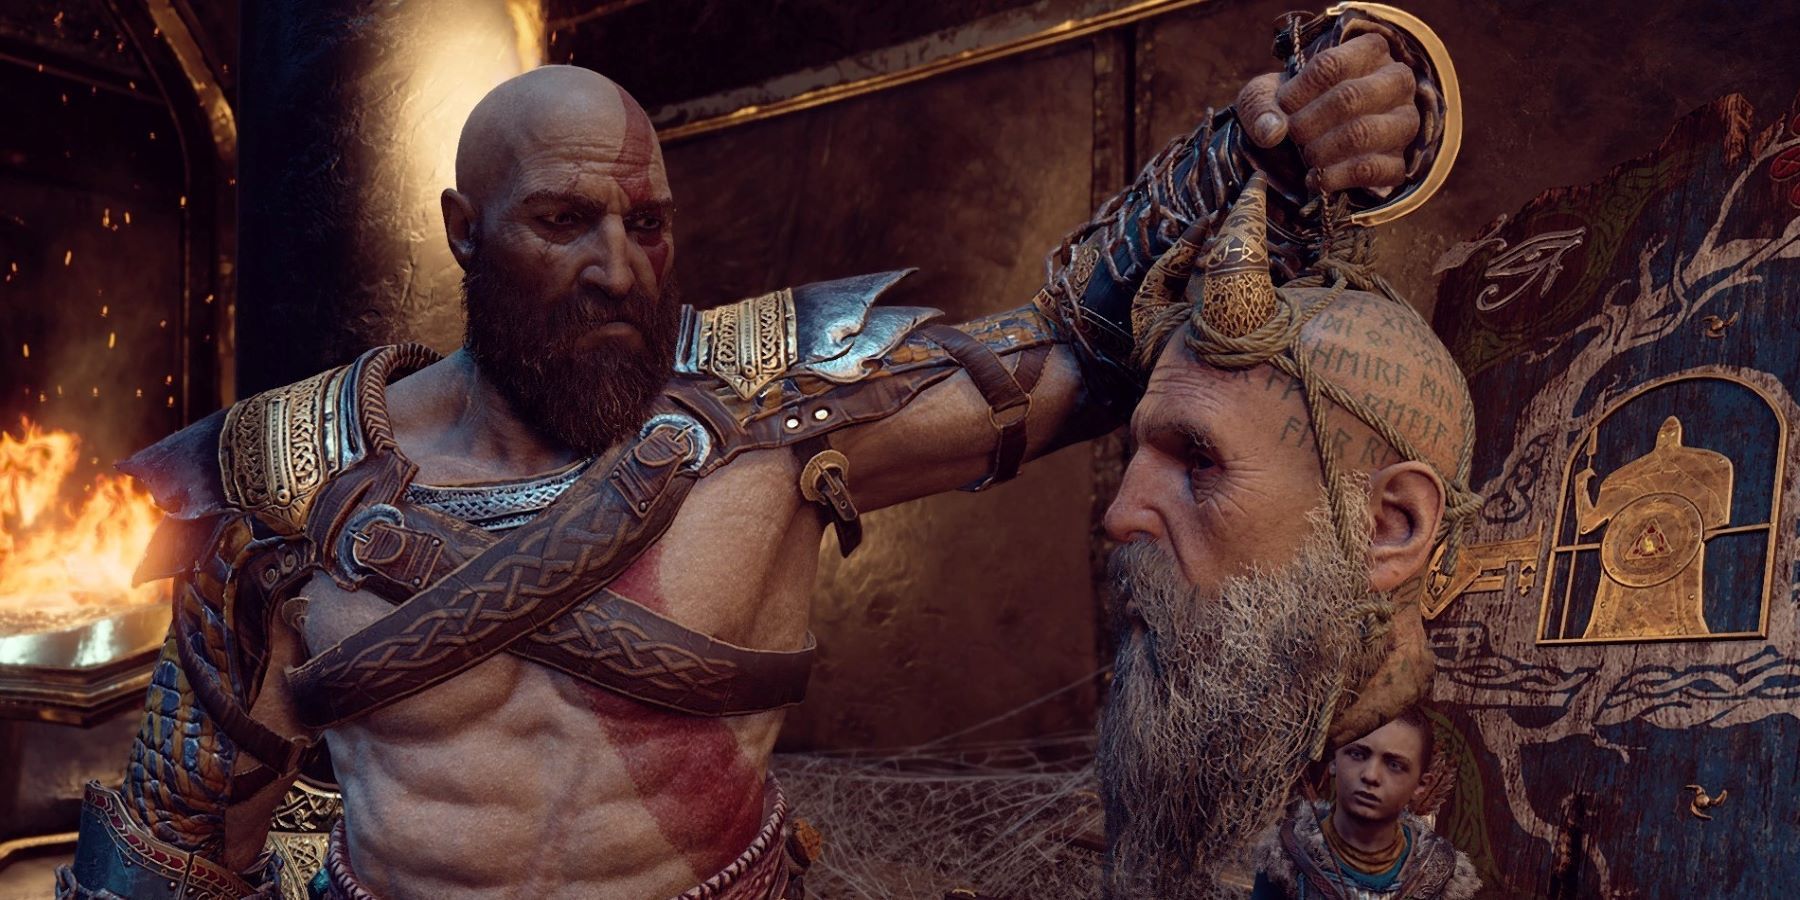 Kratos holding Mimir's head in God of War with Atreus in background